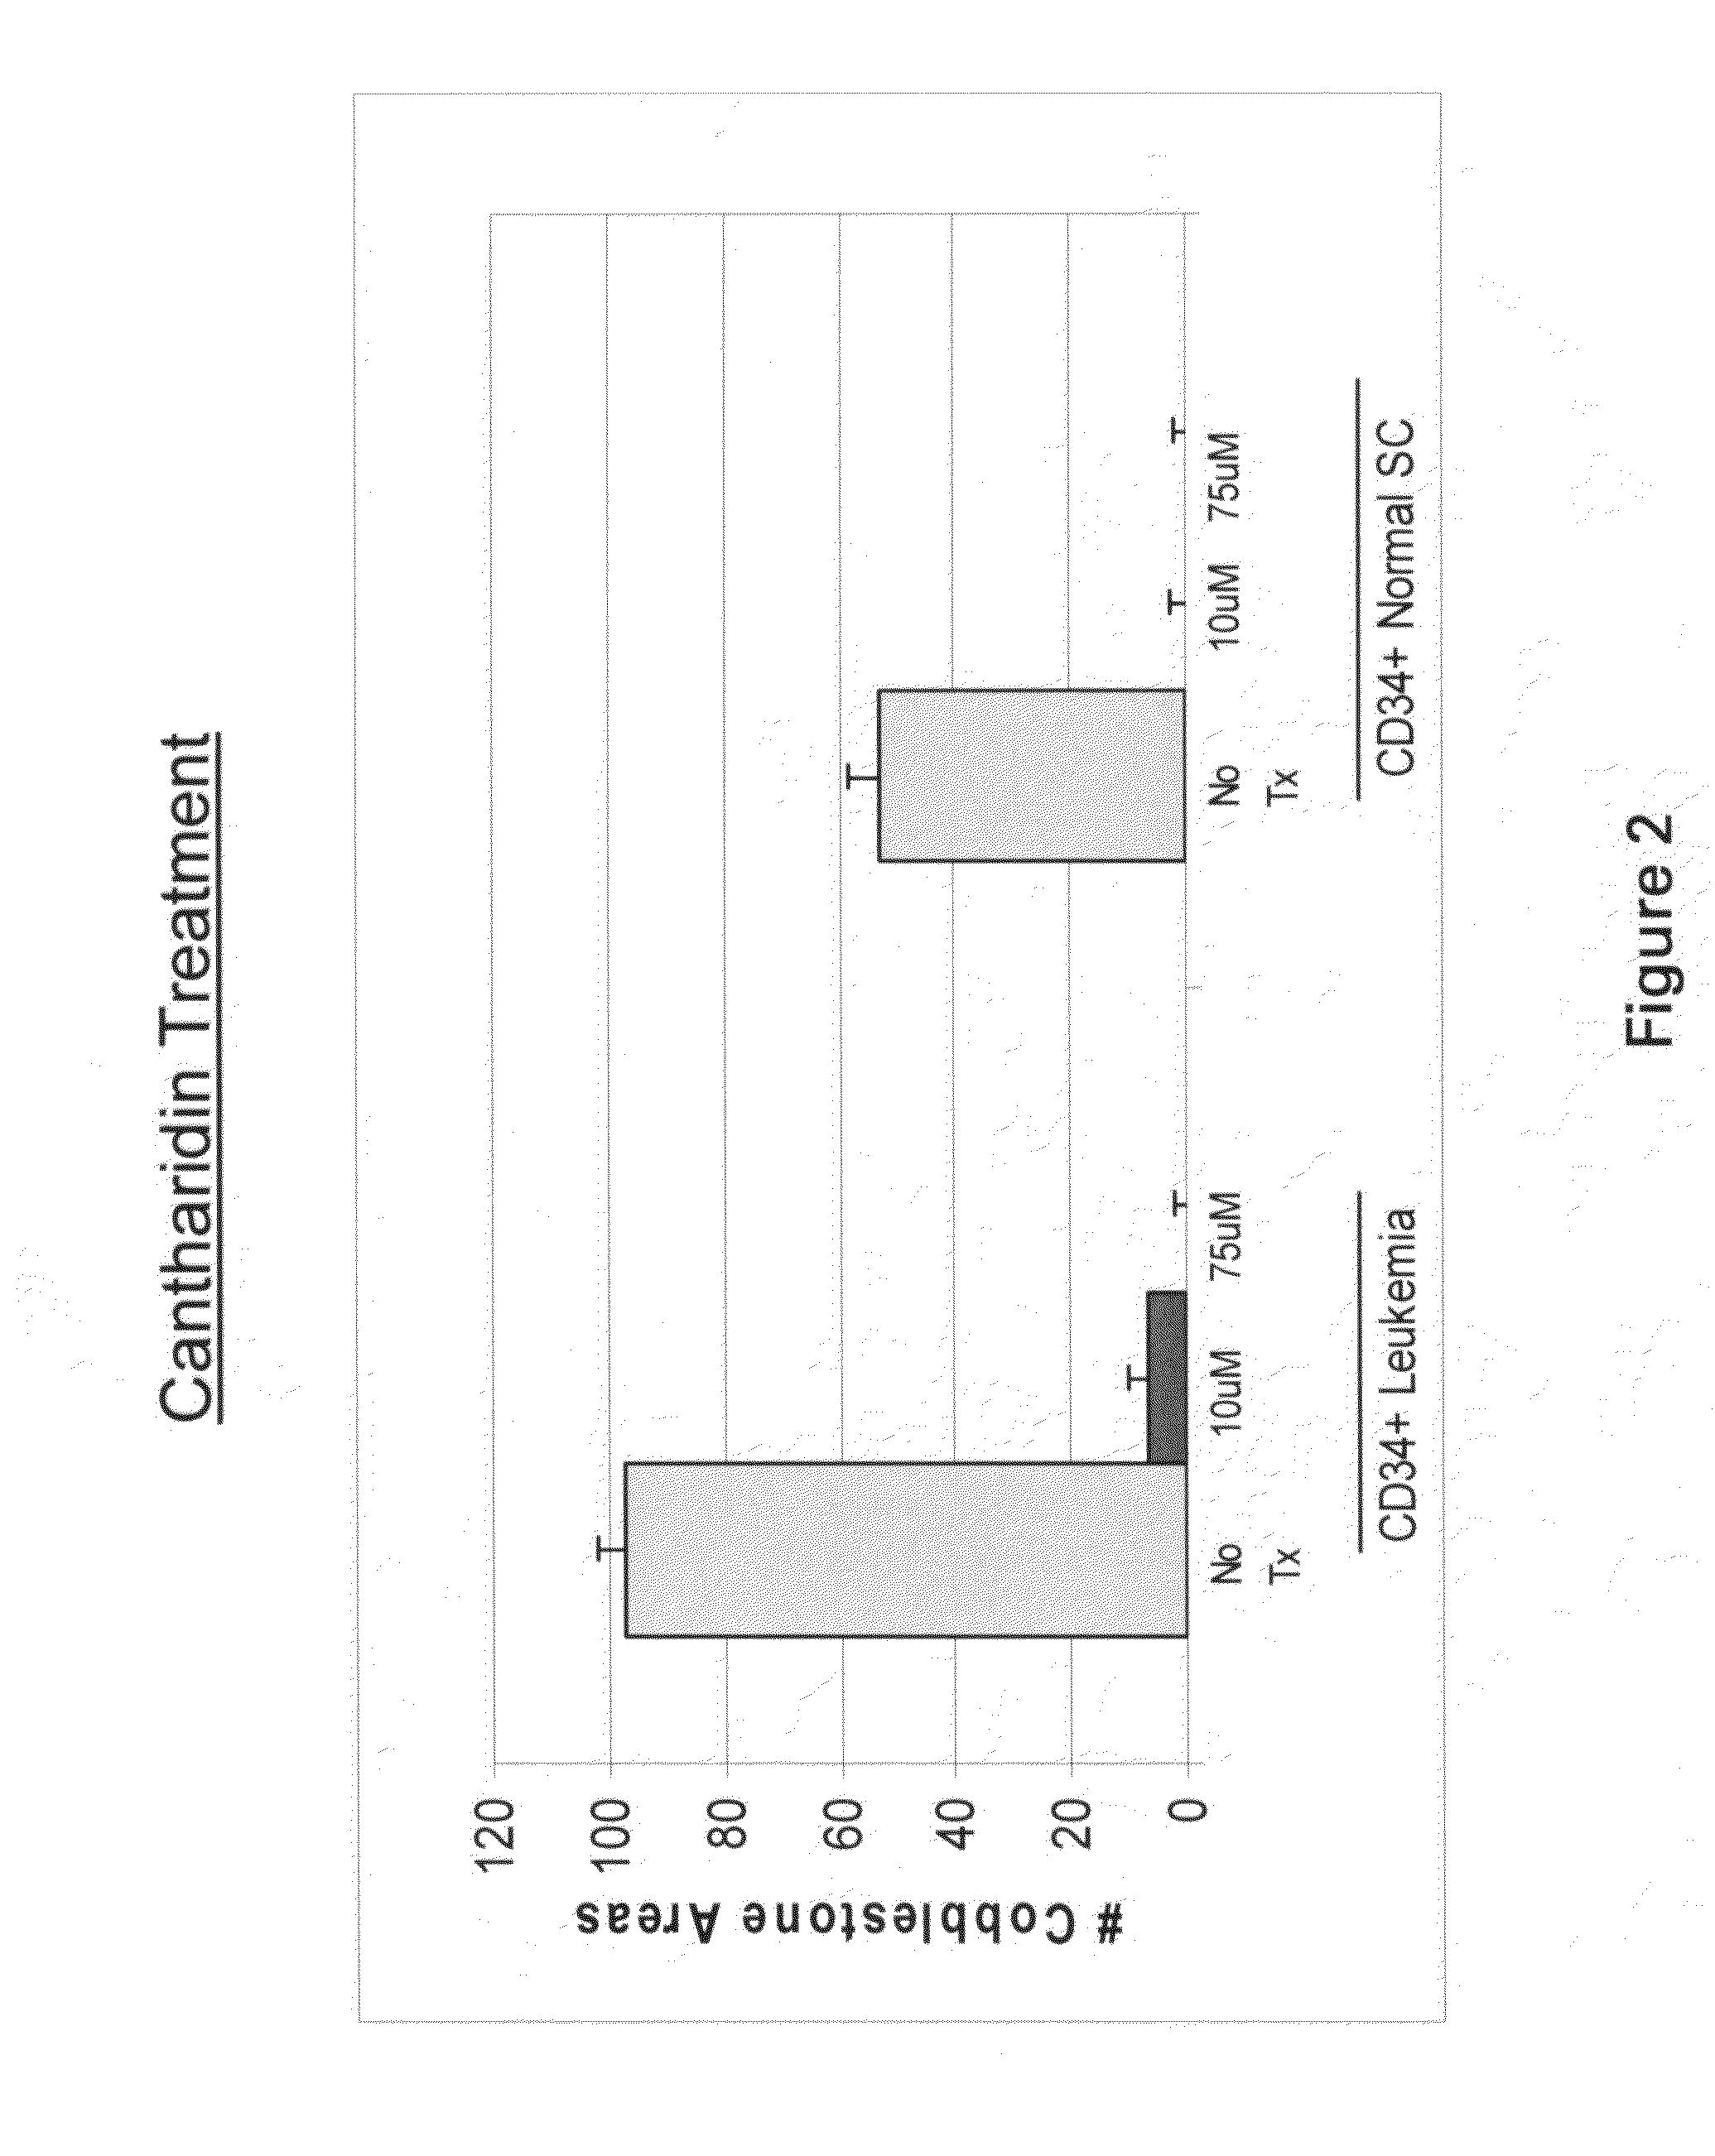 Cancer therapy with cantharidin and cantharidin analogs